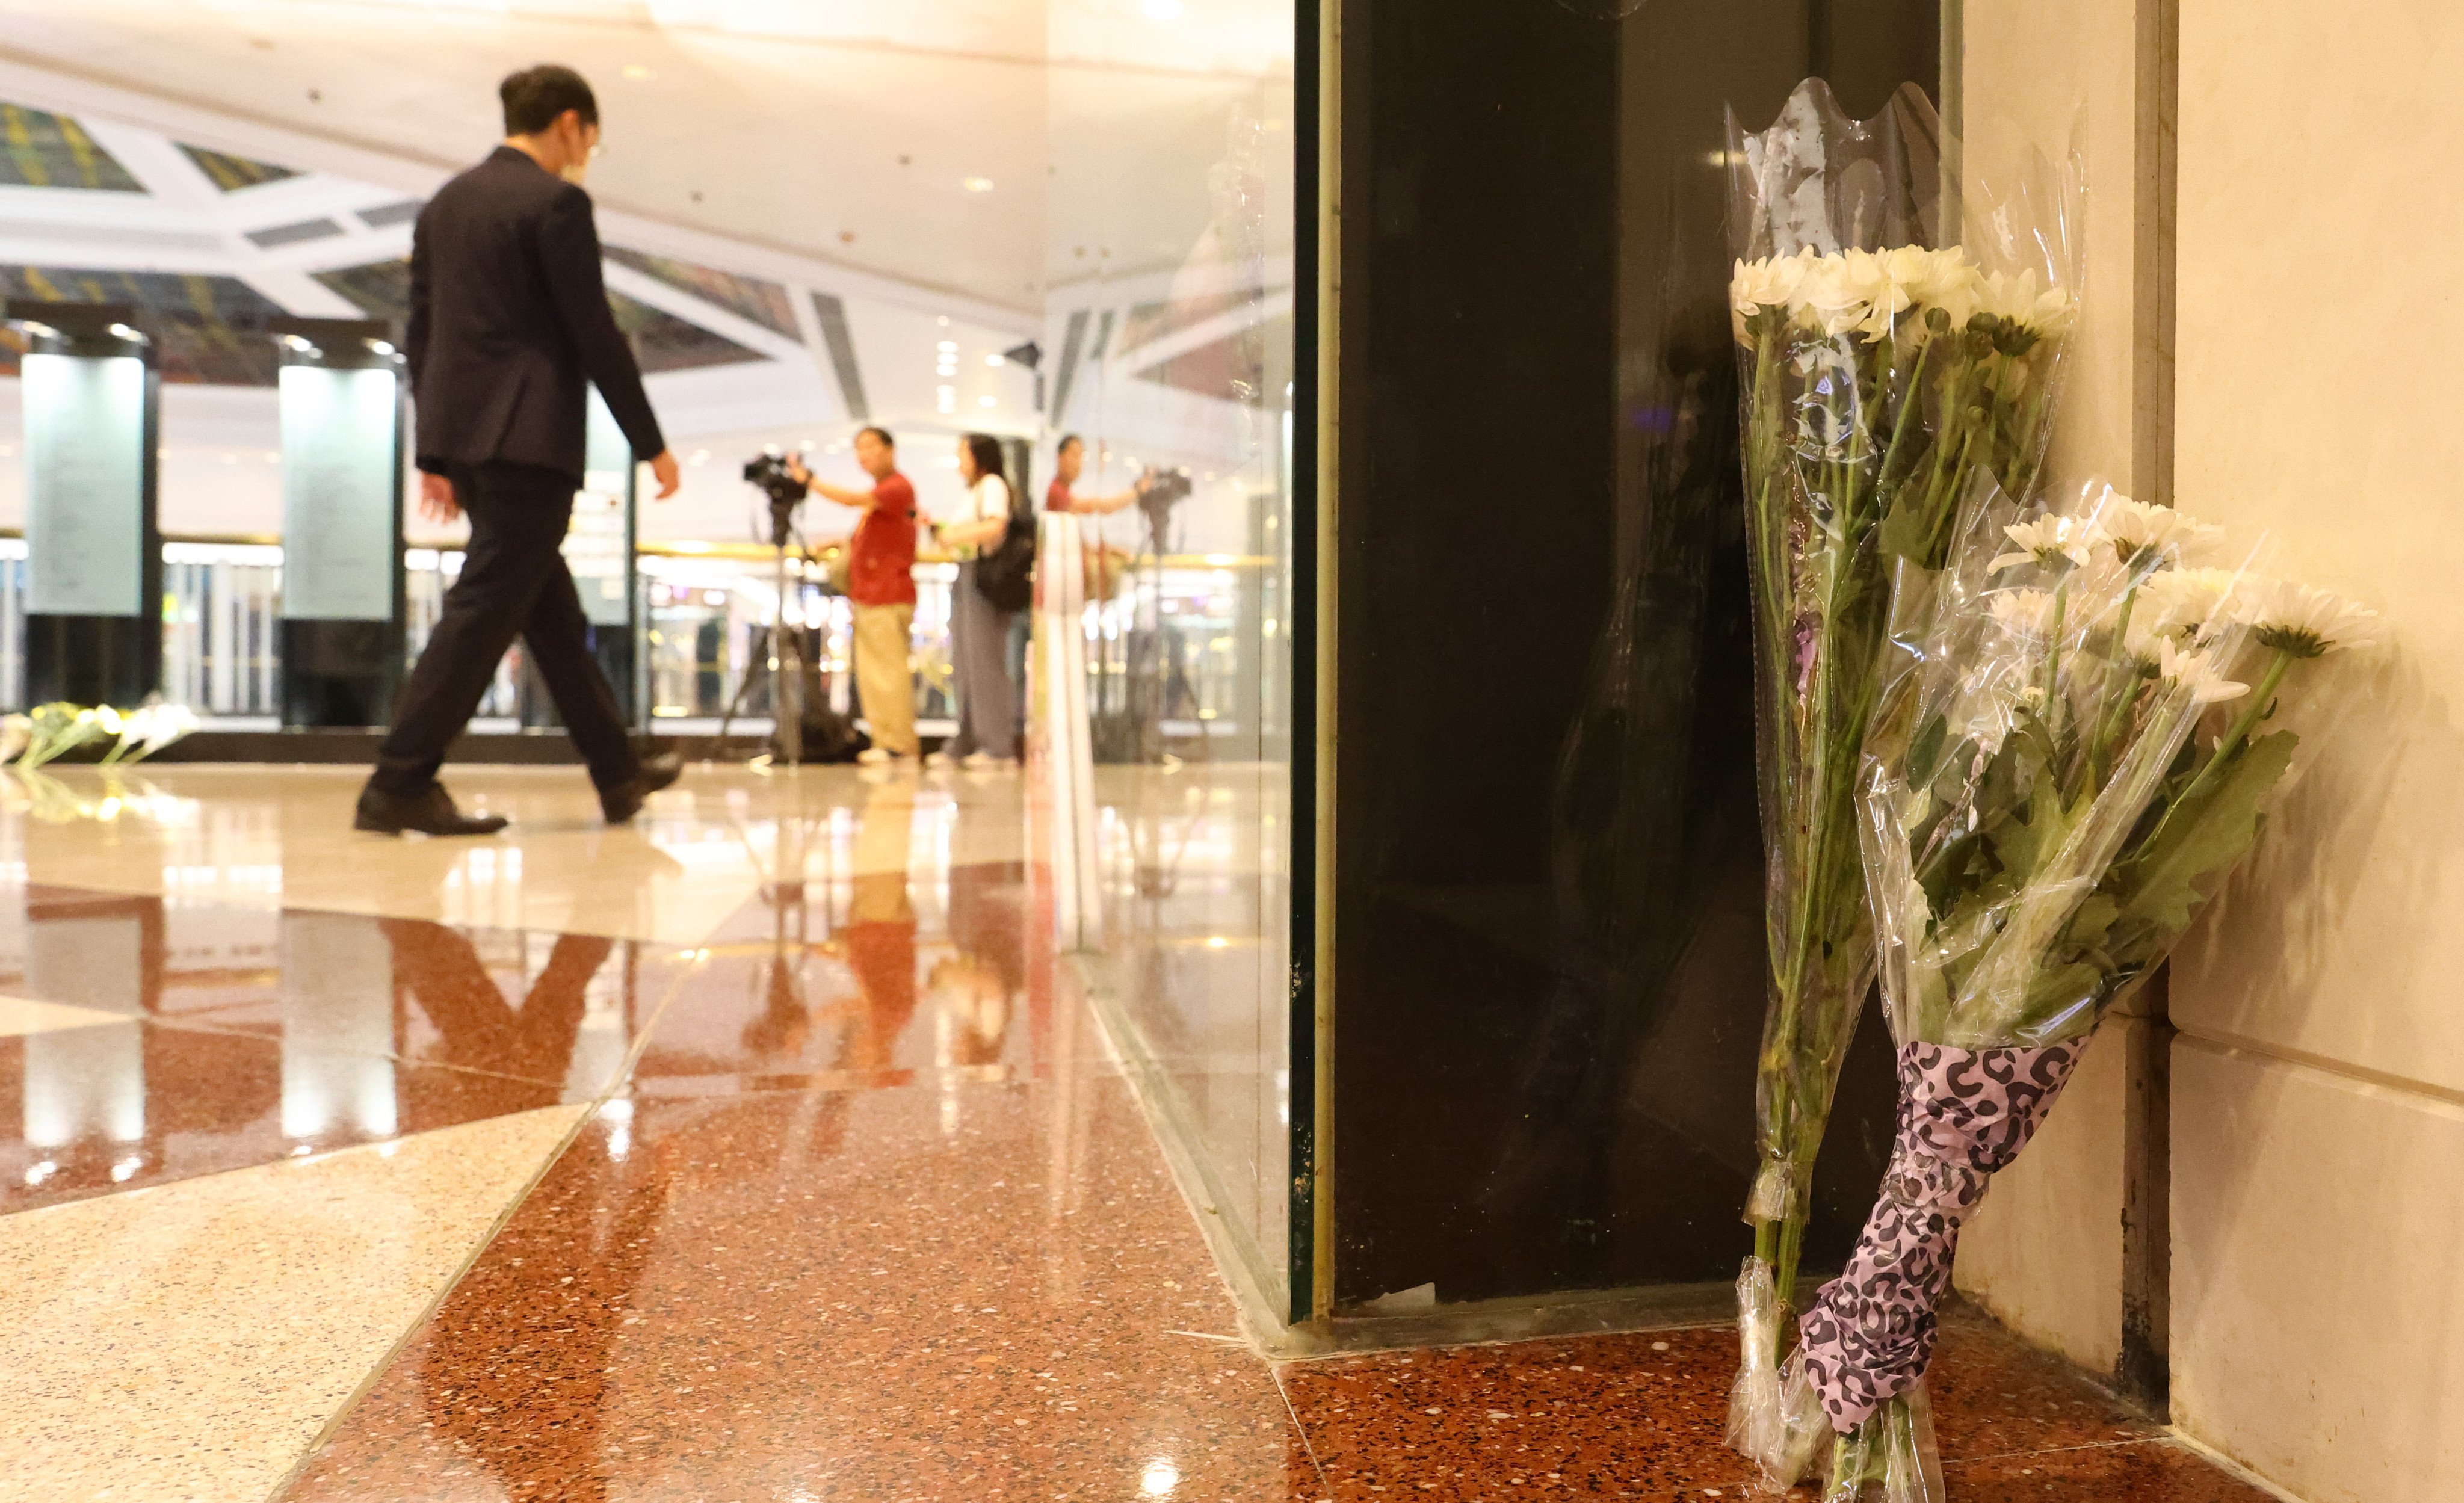 Flowers are seen in Plaza Hollywood, in Diamond Hill, on June 3, after two women were killed in a knife attack. The incident is one in a recent string of violent attacks in Hong Kong. Photo: Dickson Lee